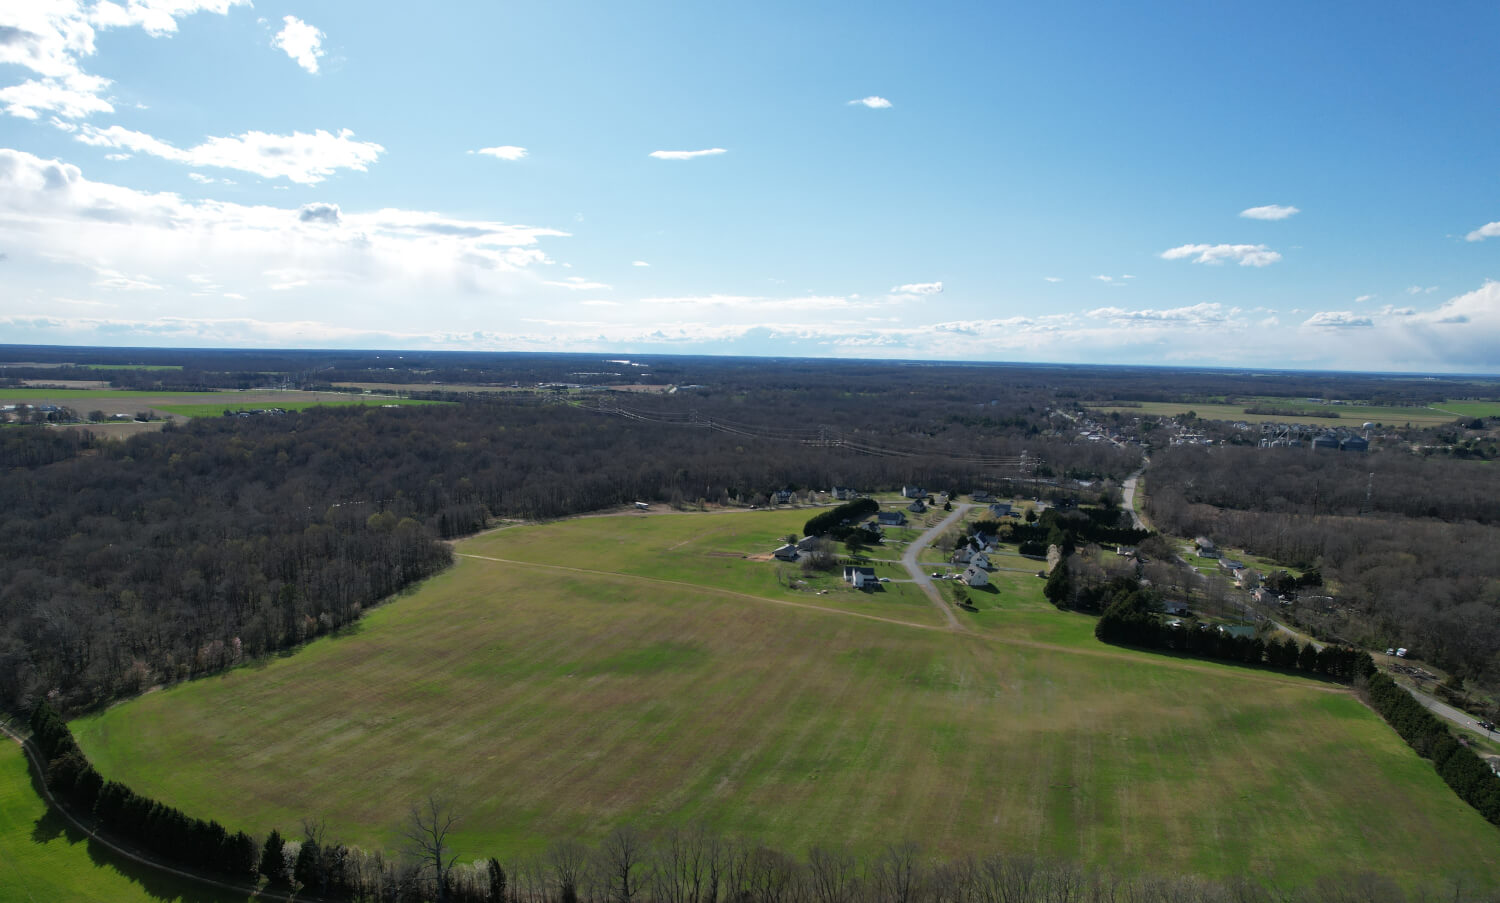 Land for sale in Kent County MD